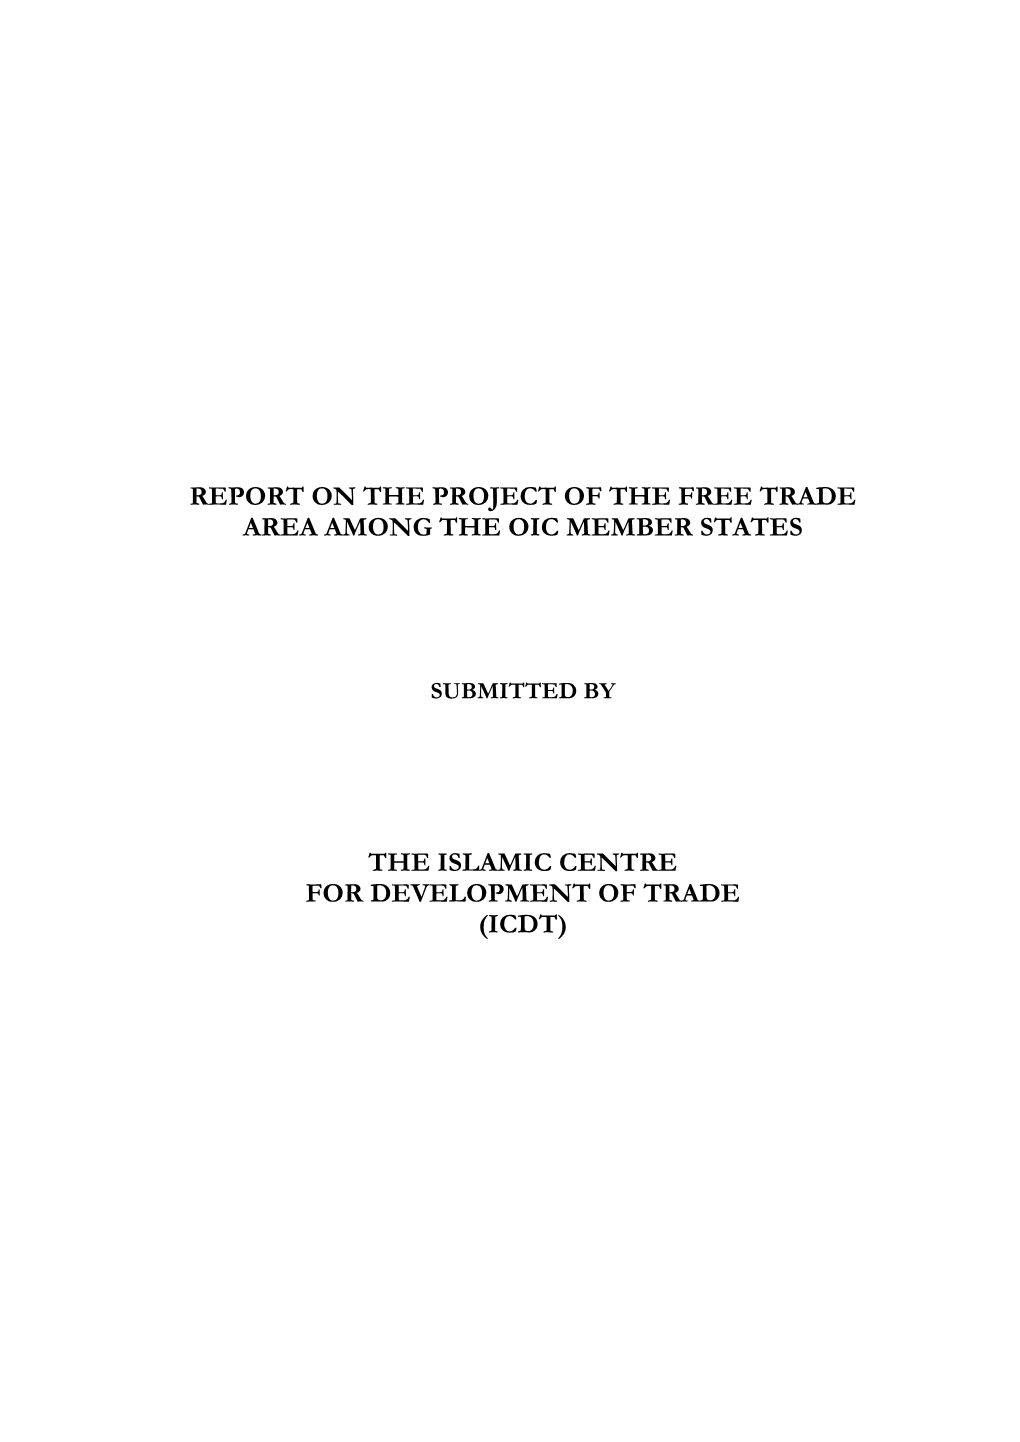 Report on the Project of the Free Trade Area Among the Oic Member States